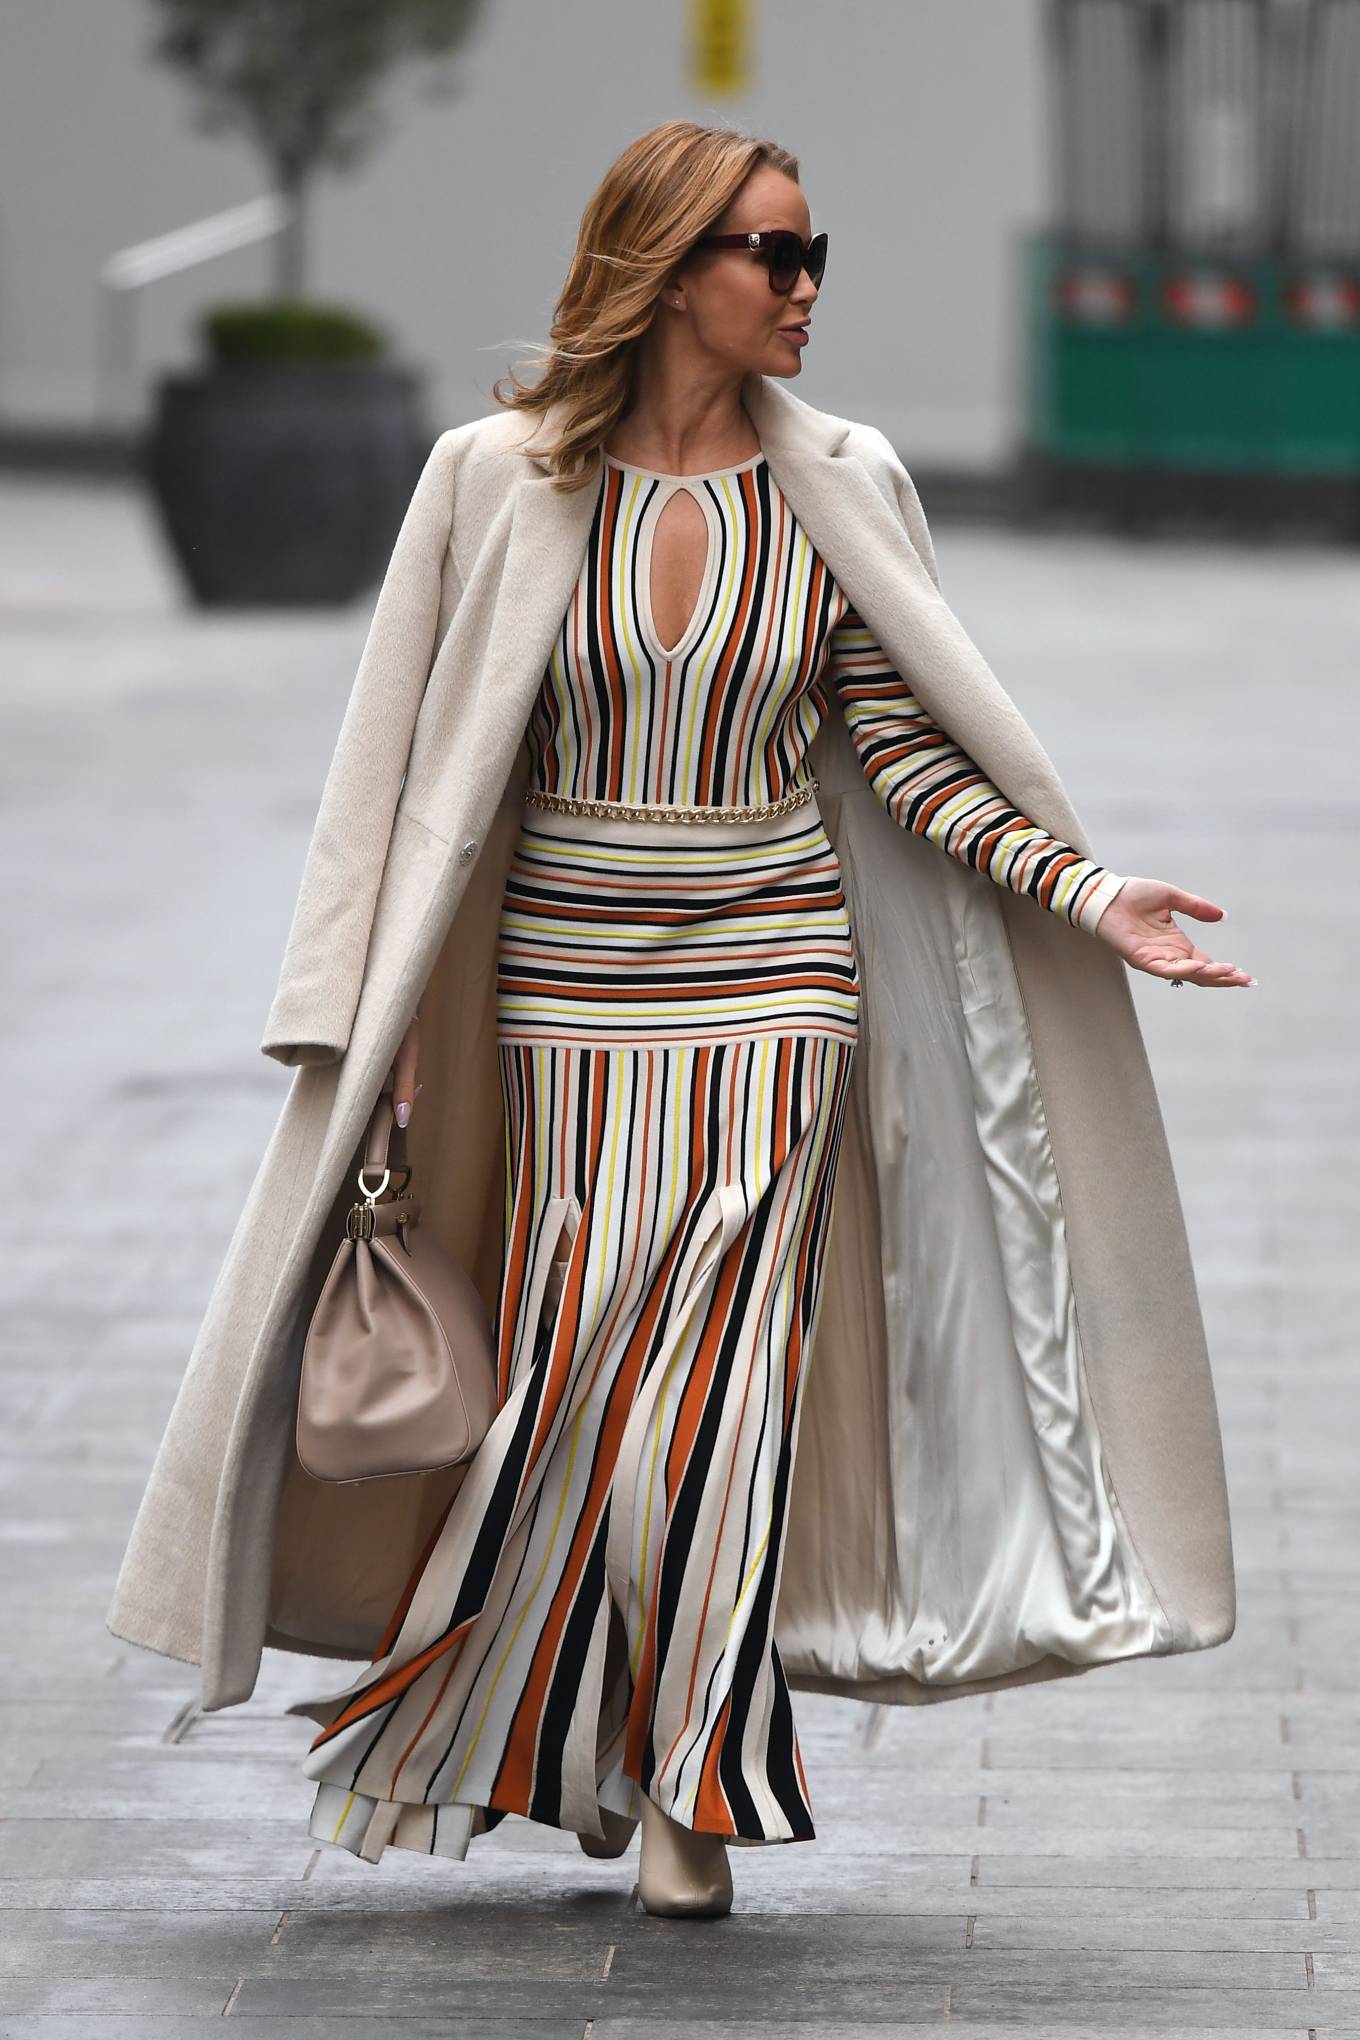 Amanda Holden – In striped dress and knee high boots in London